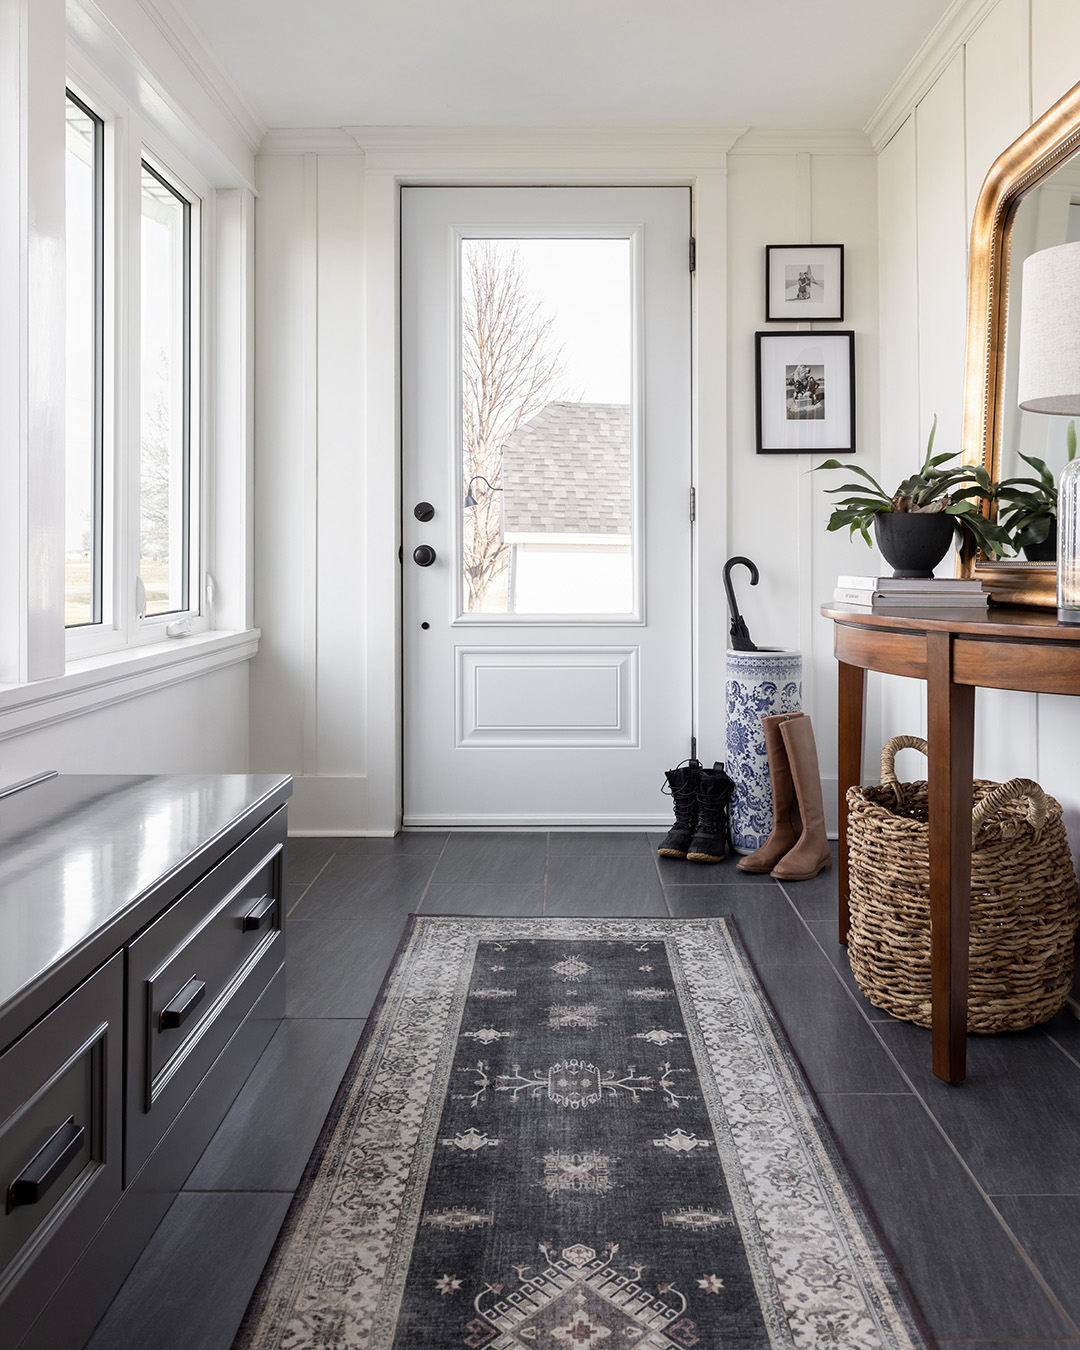 A mudroom full of vintage home decor ideas.